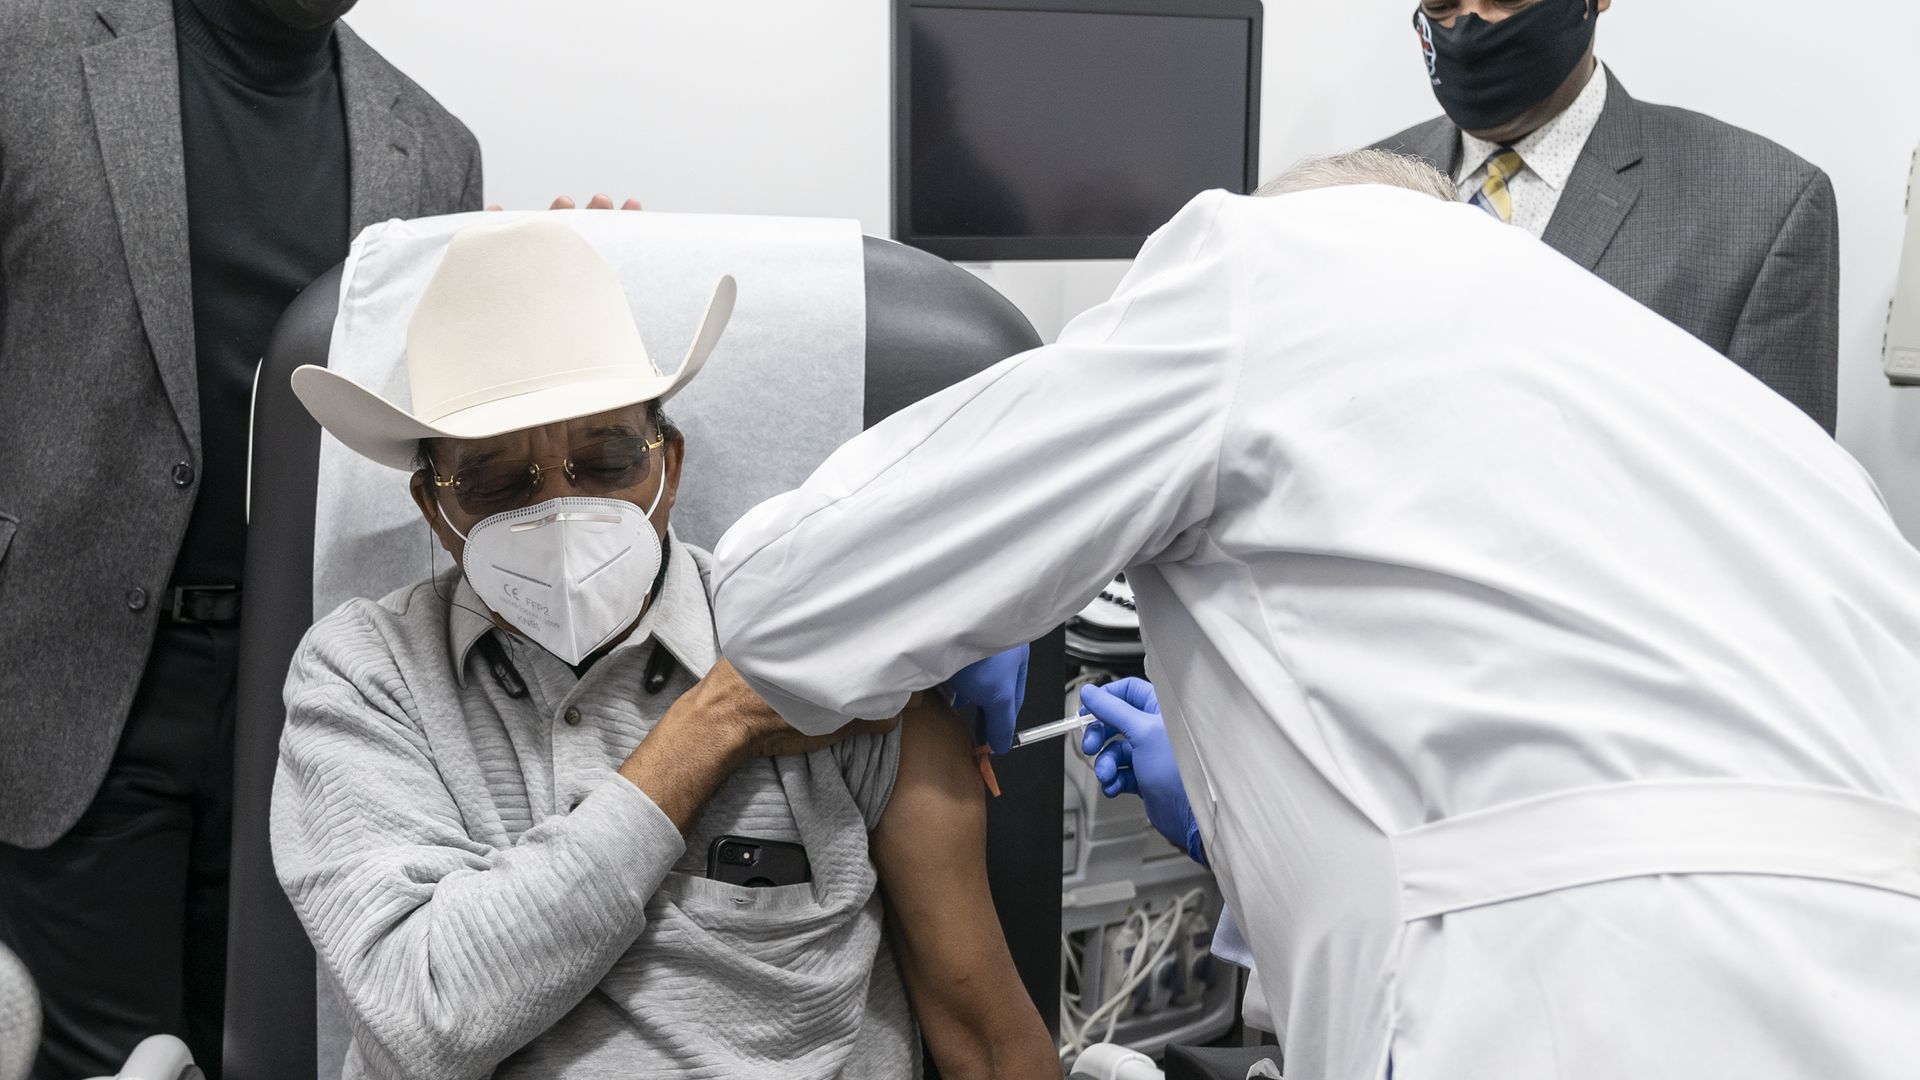 Picture of a doctor wearing a white coat administering a vaccine to a person wearing a cowboy hat